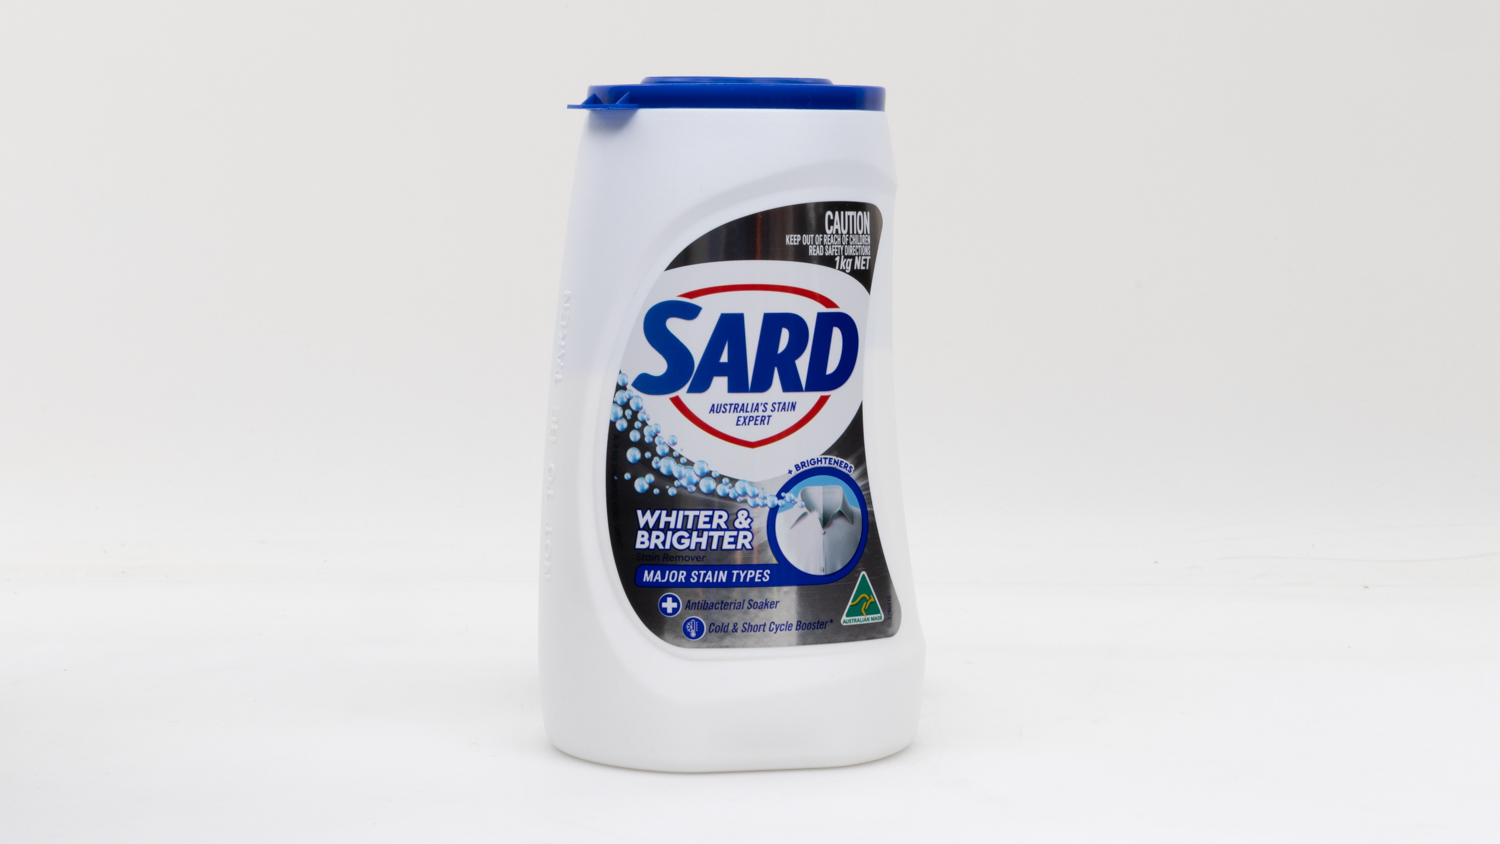 Sard Whiter & Brighter Stain Remover Major Stain Types Antibacterial Soaker carousel image